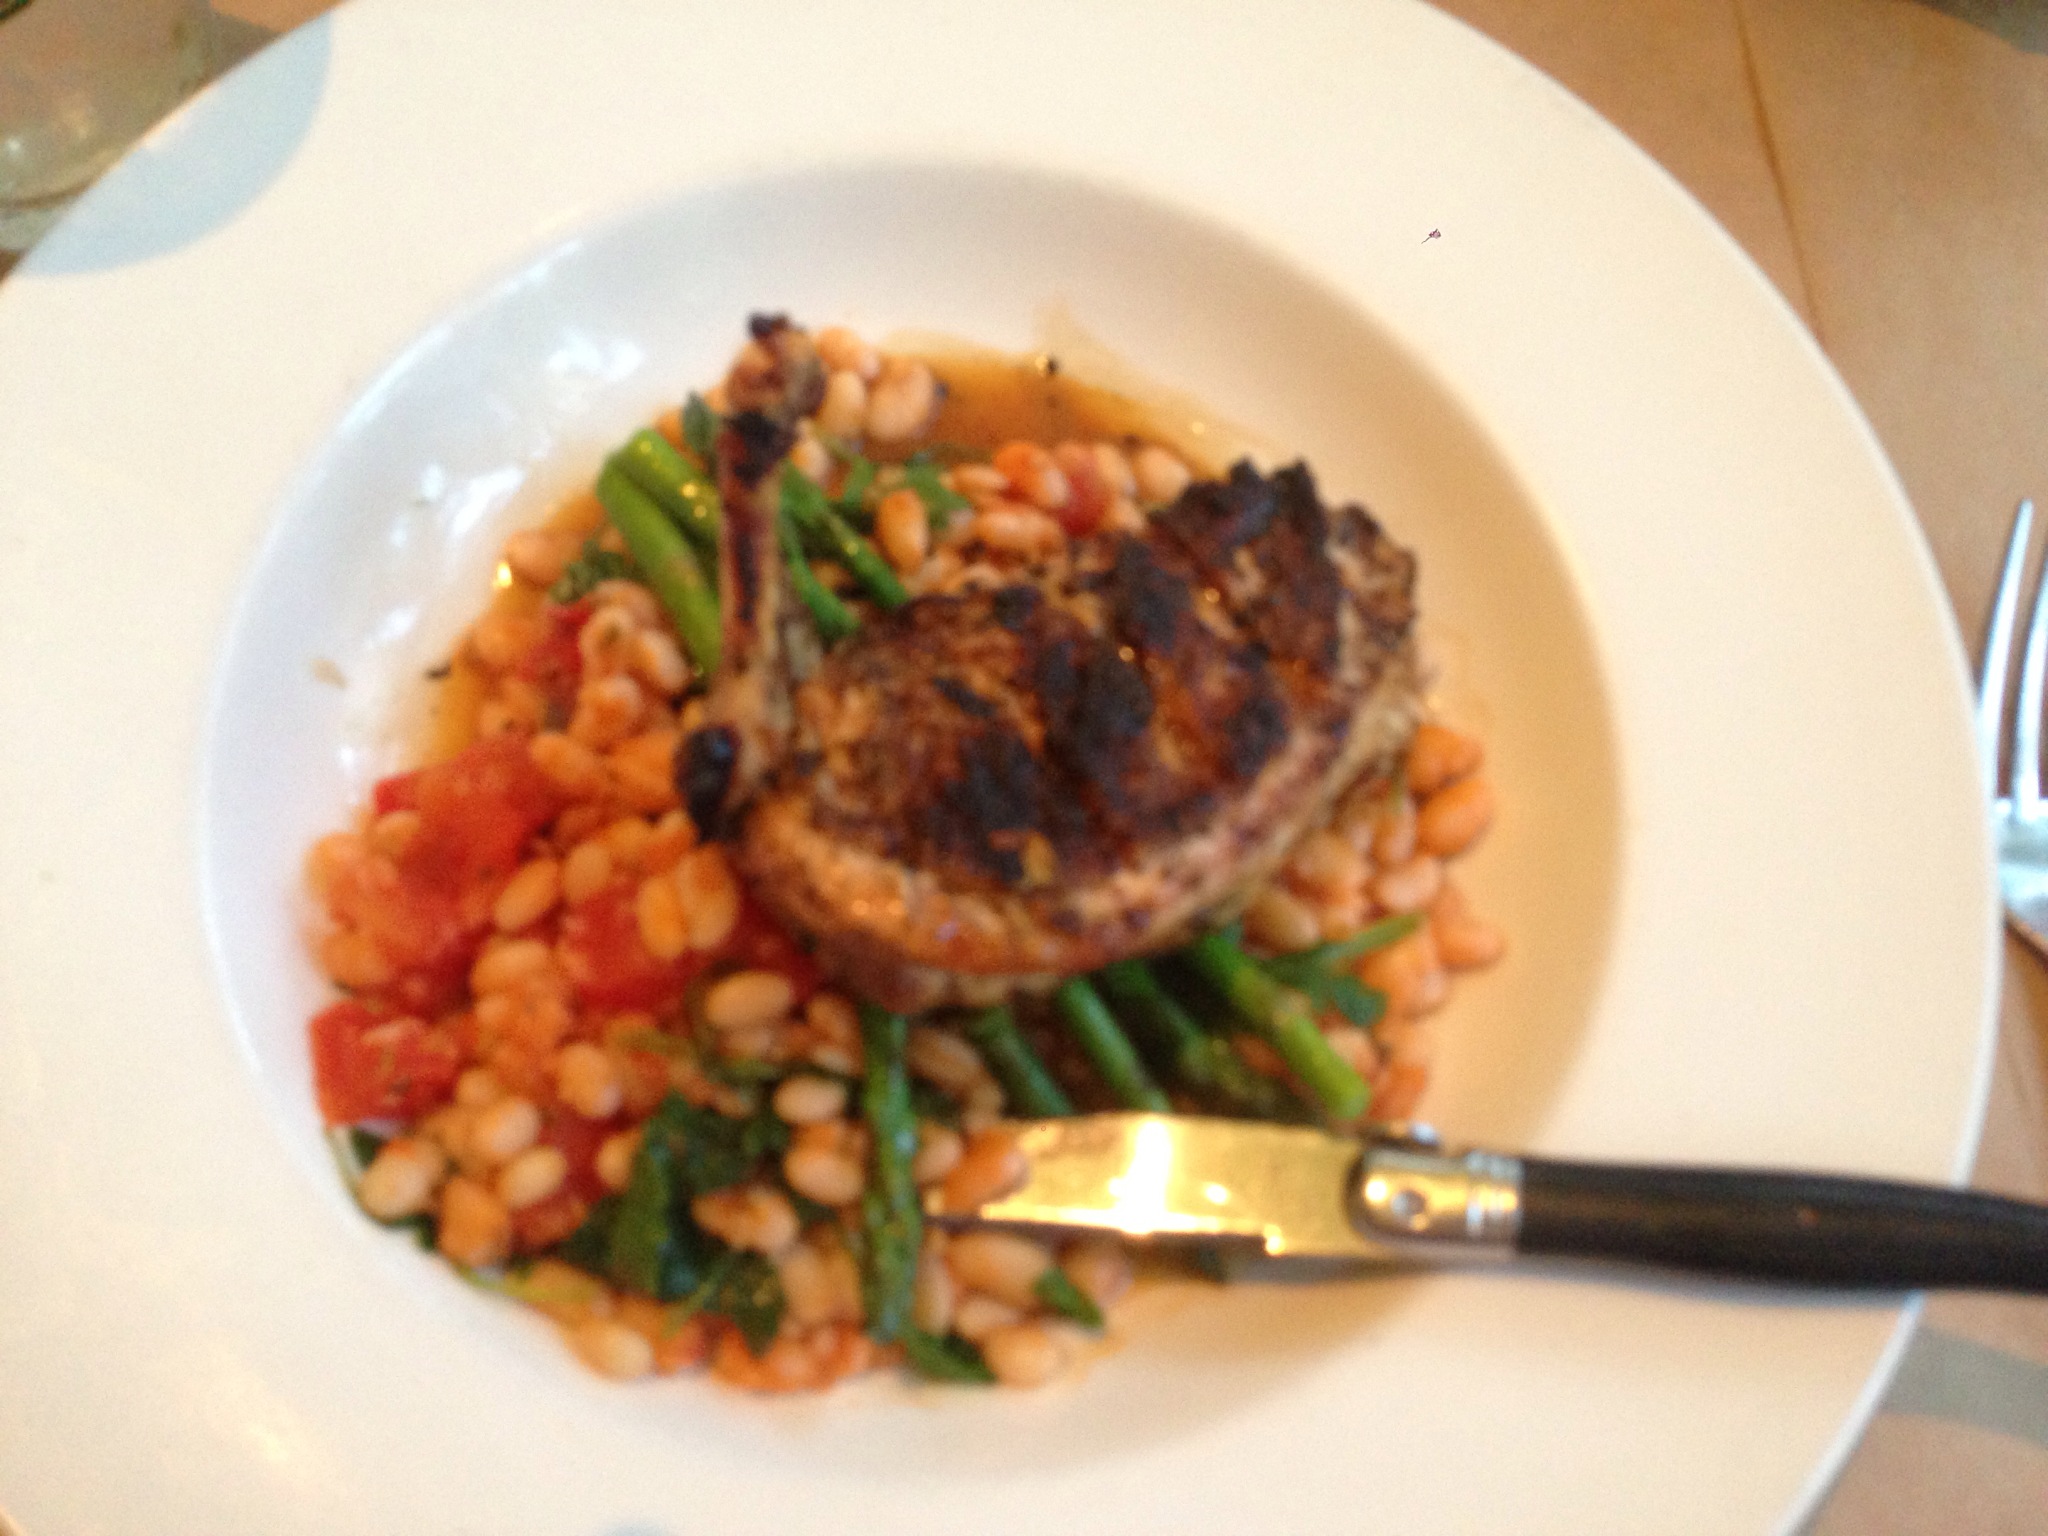 Best chicken I've had in years. Perfectly tender and flavorful chicken atop white beans with tomato, spinach and asparagus. 